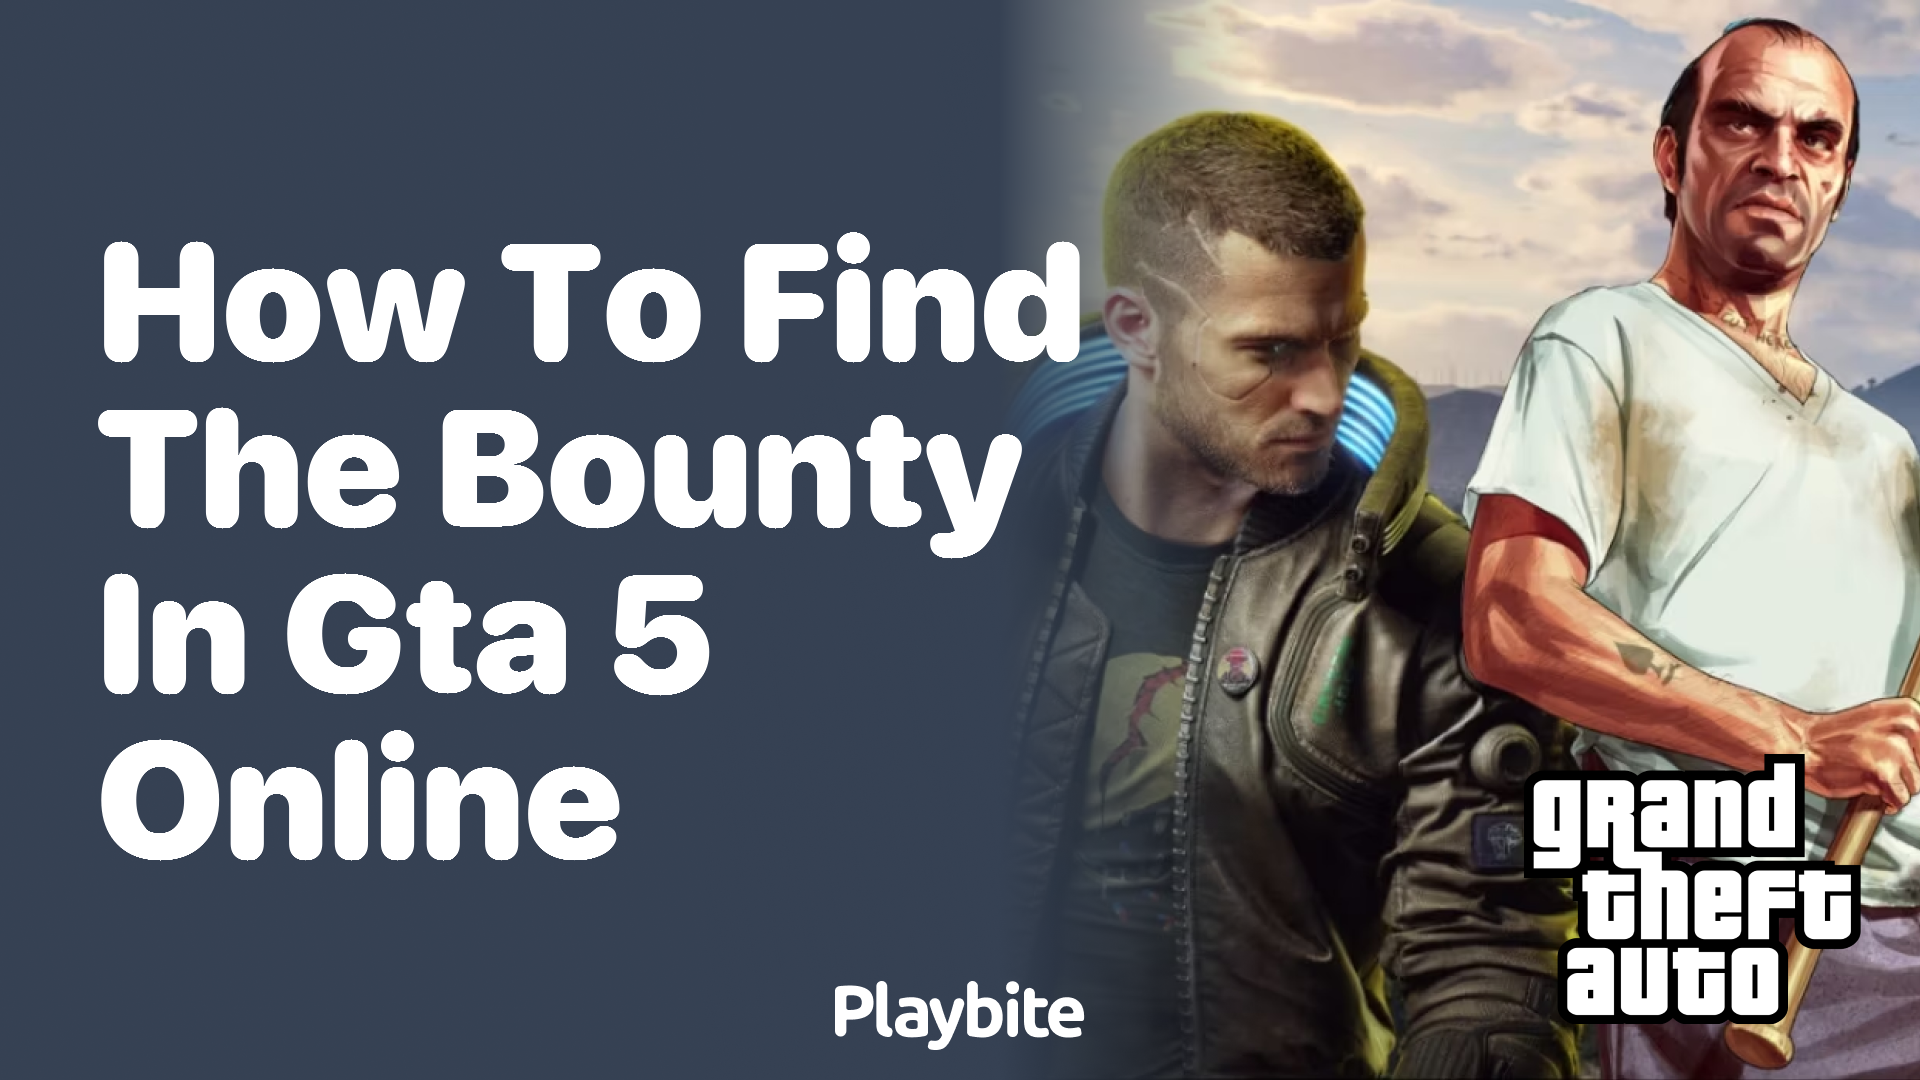 How to find the bounty in GTA 5 online